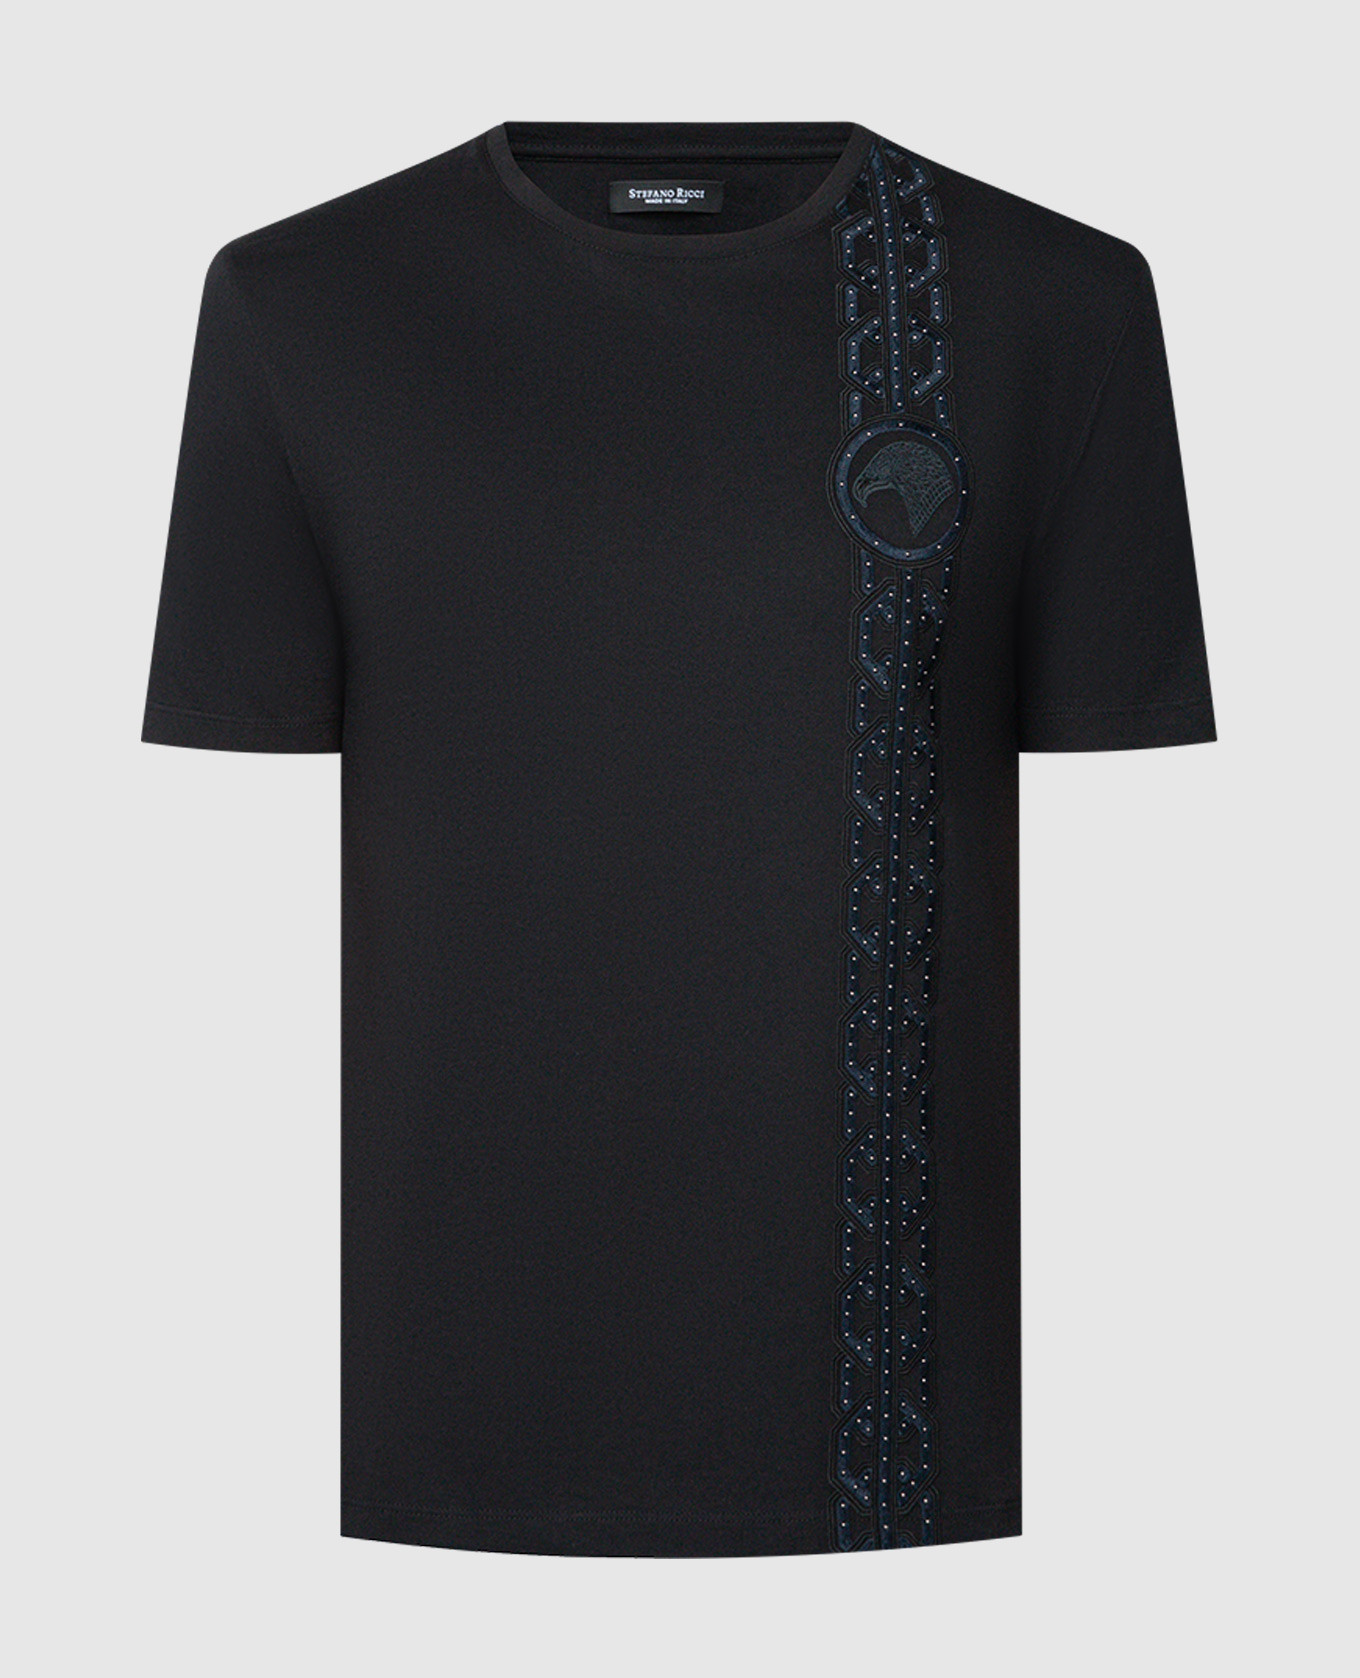 Black T-shirt with embroidery